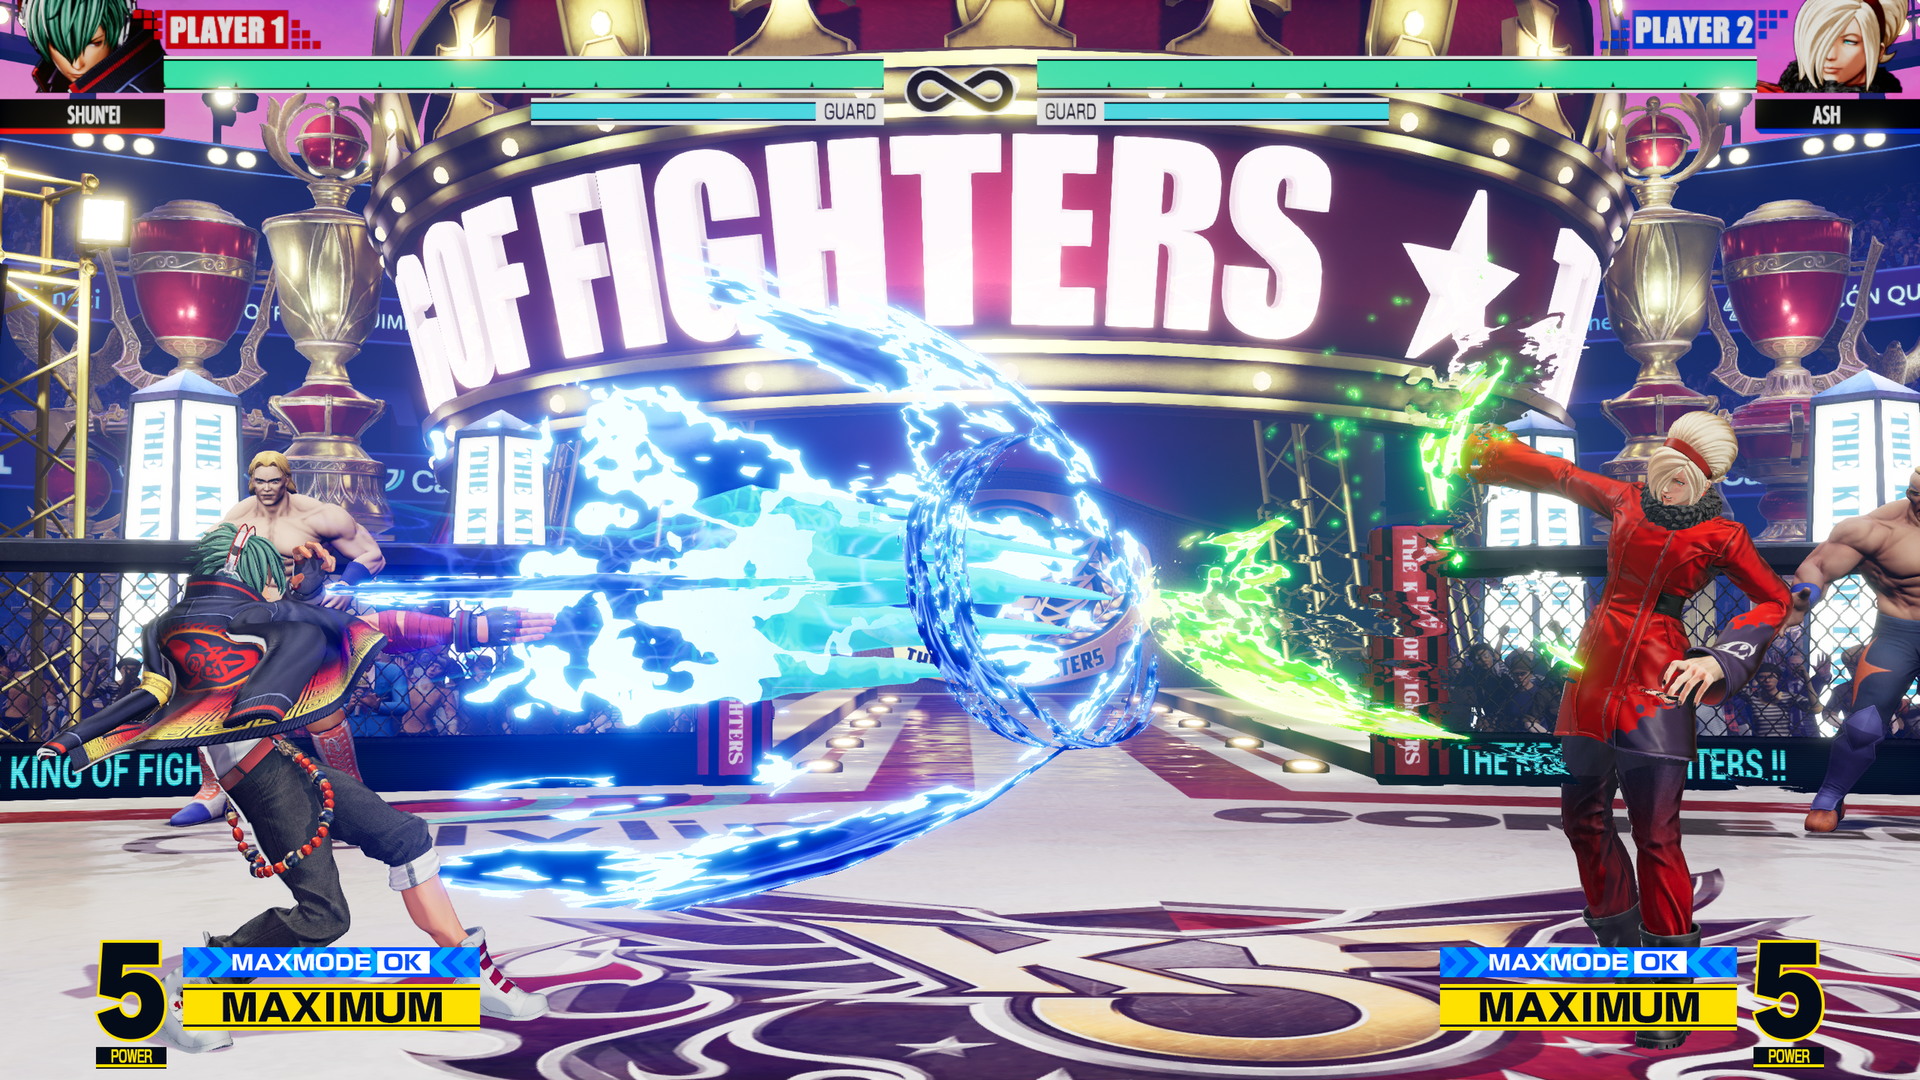 The King of Fighters XV - screenshot 5